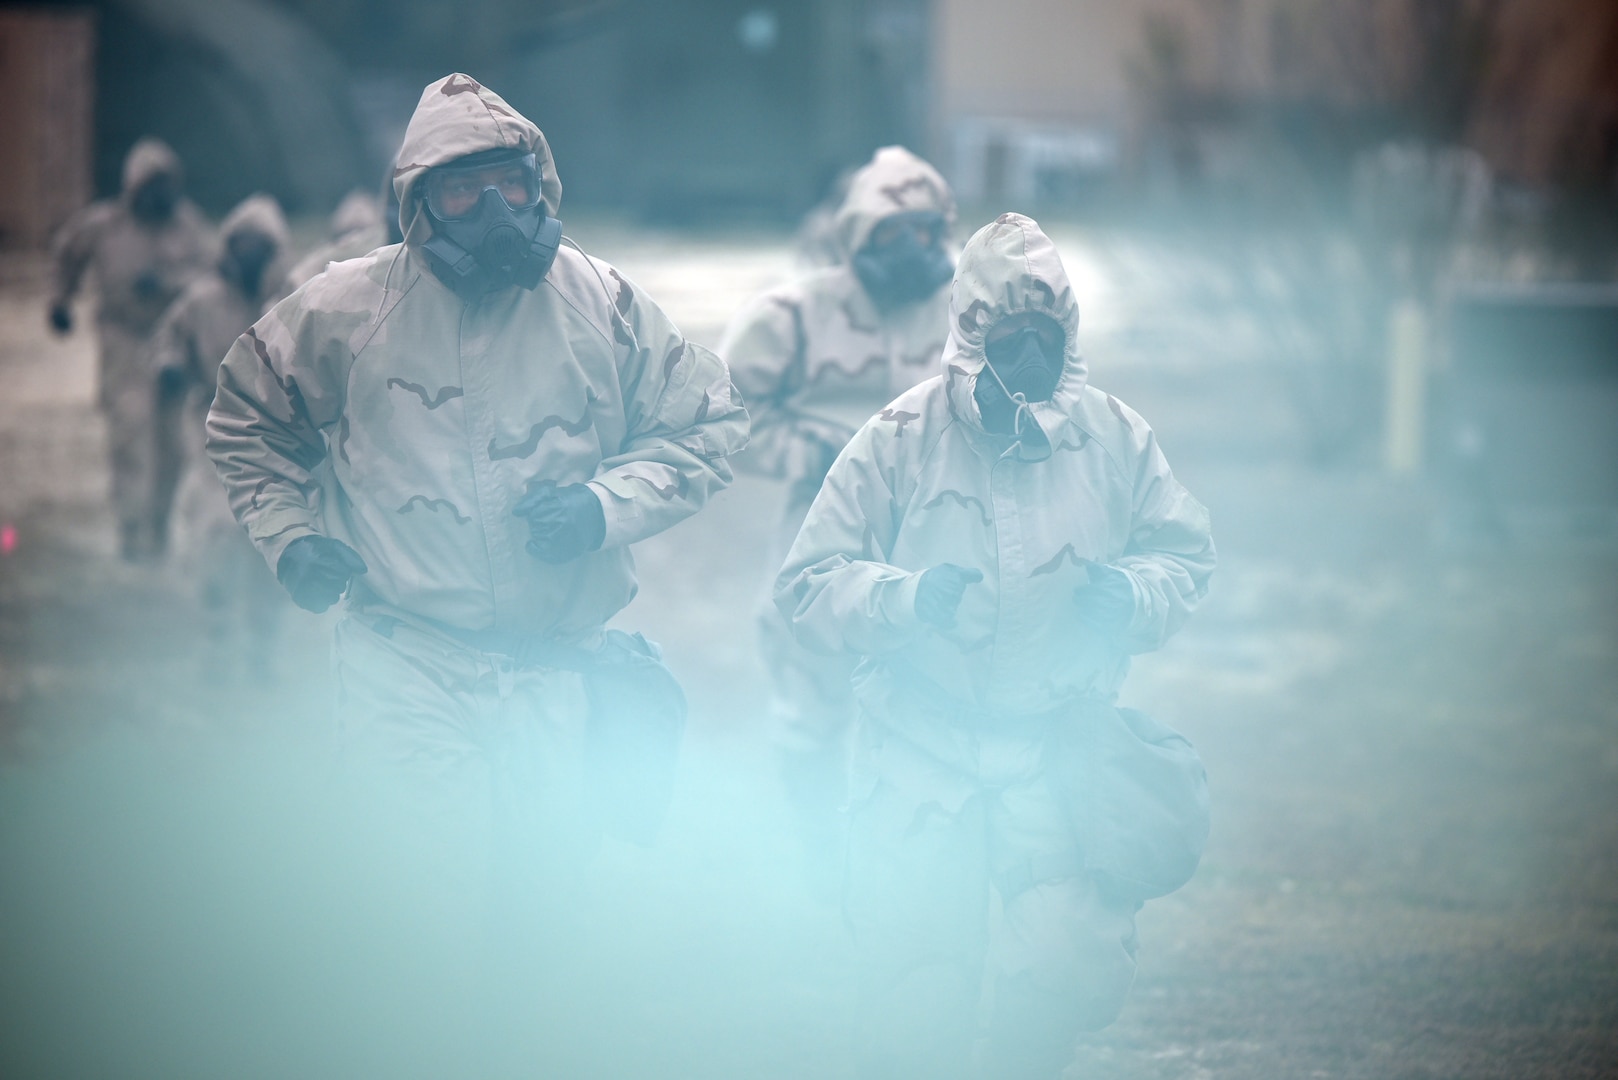 Soldiers wearing Mission Oriented Protective Posture, or MOPP, protective gear react to a simulated Chemical, Biological, Radiological, and Nuclear, or CBRN, attack at Joint Base San Antonio-Camp Bullis